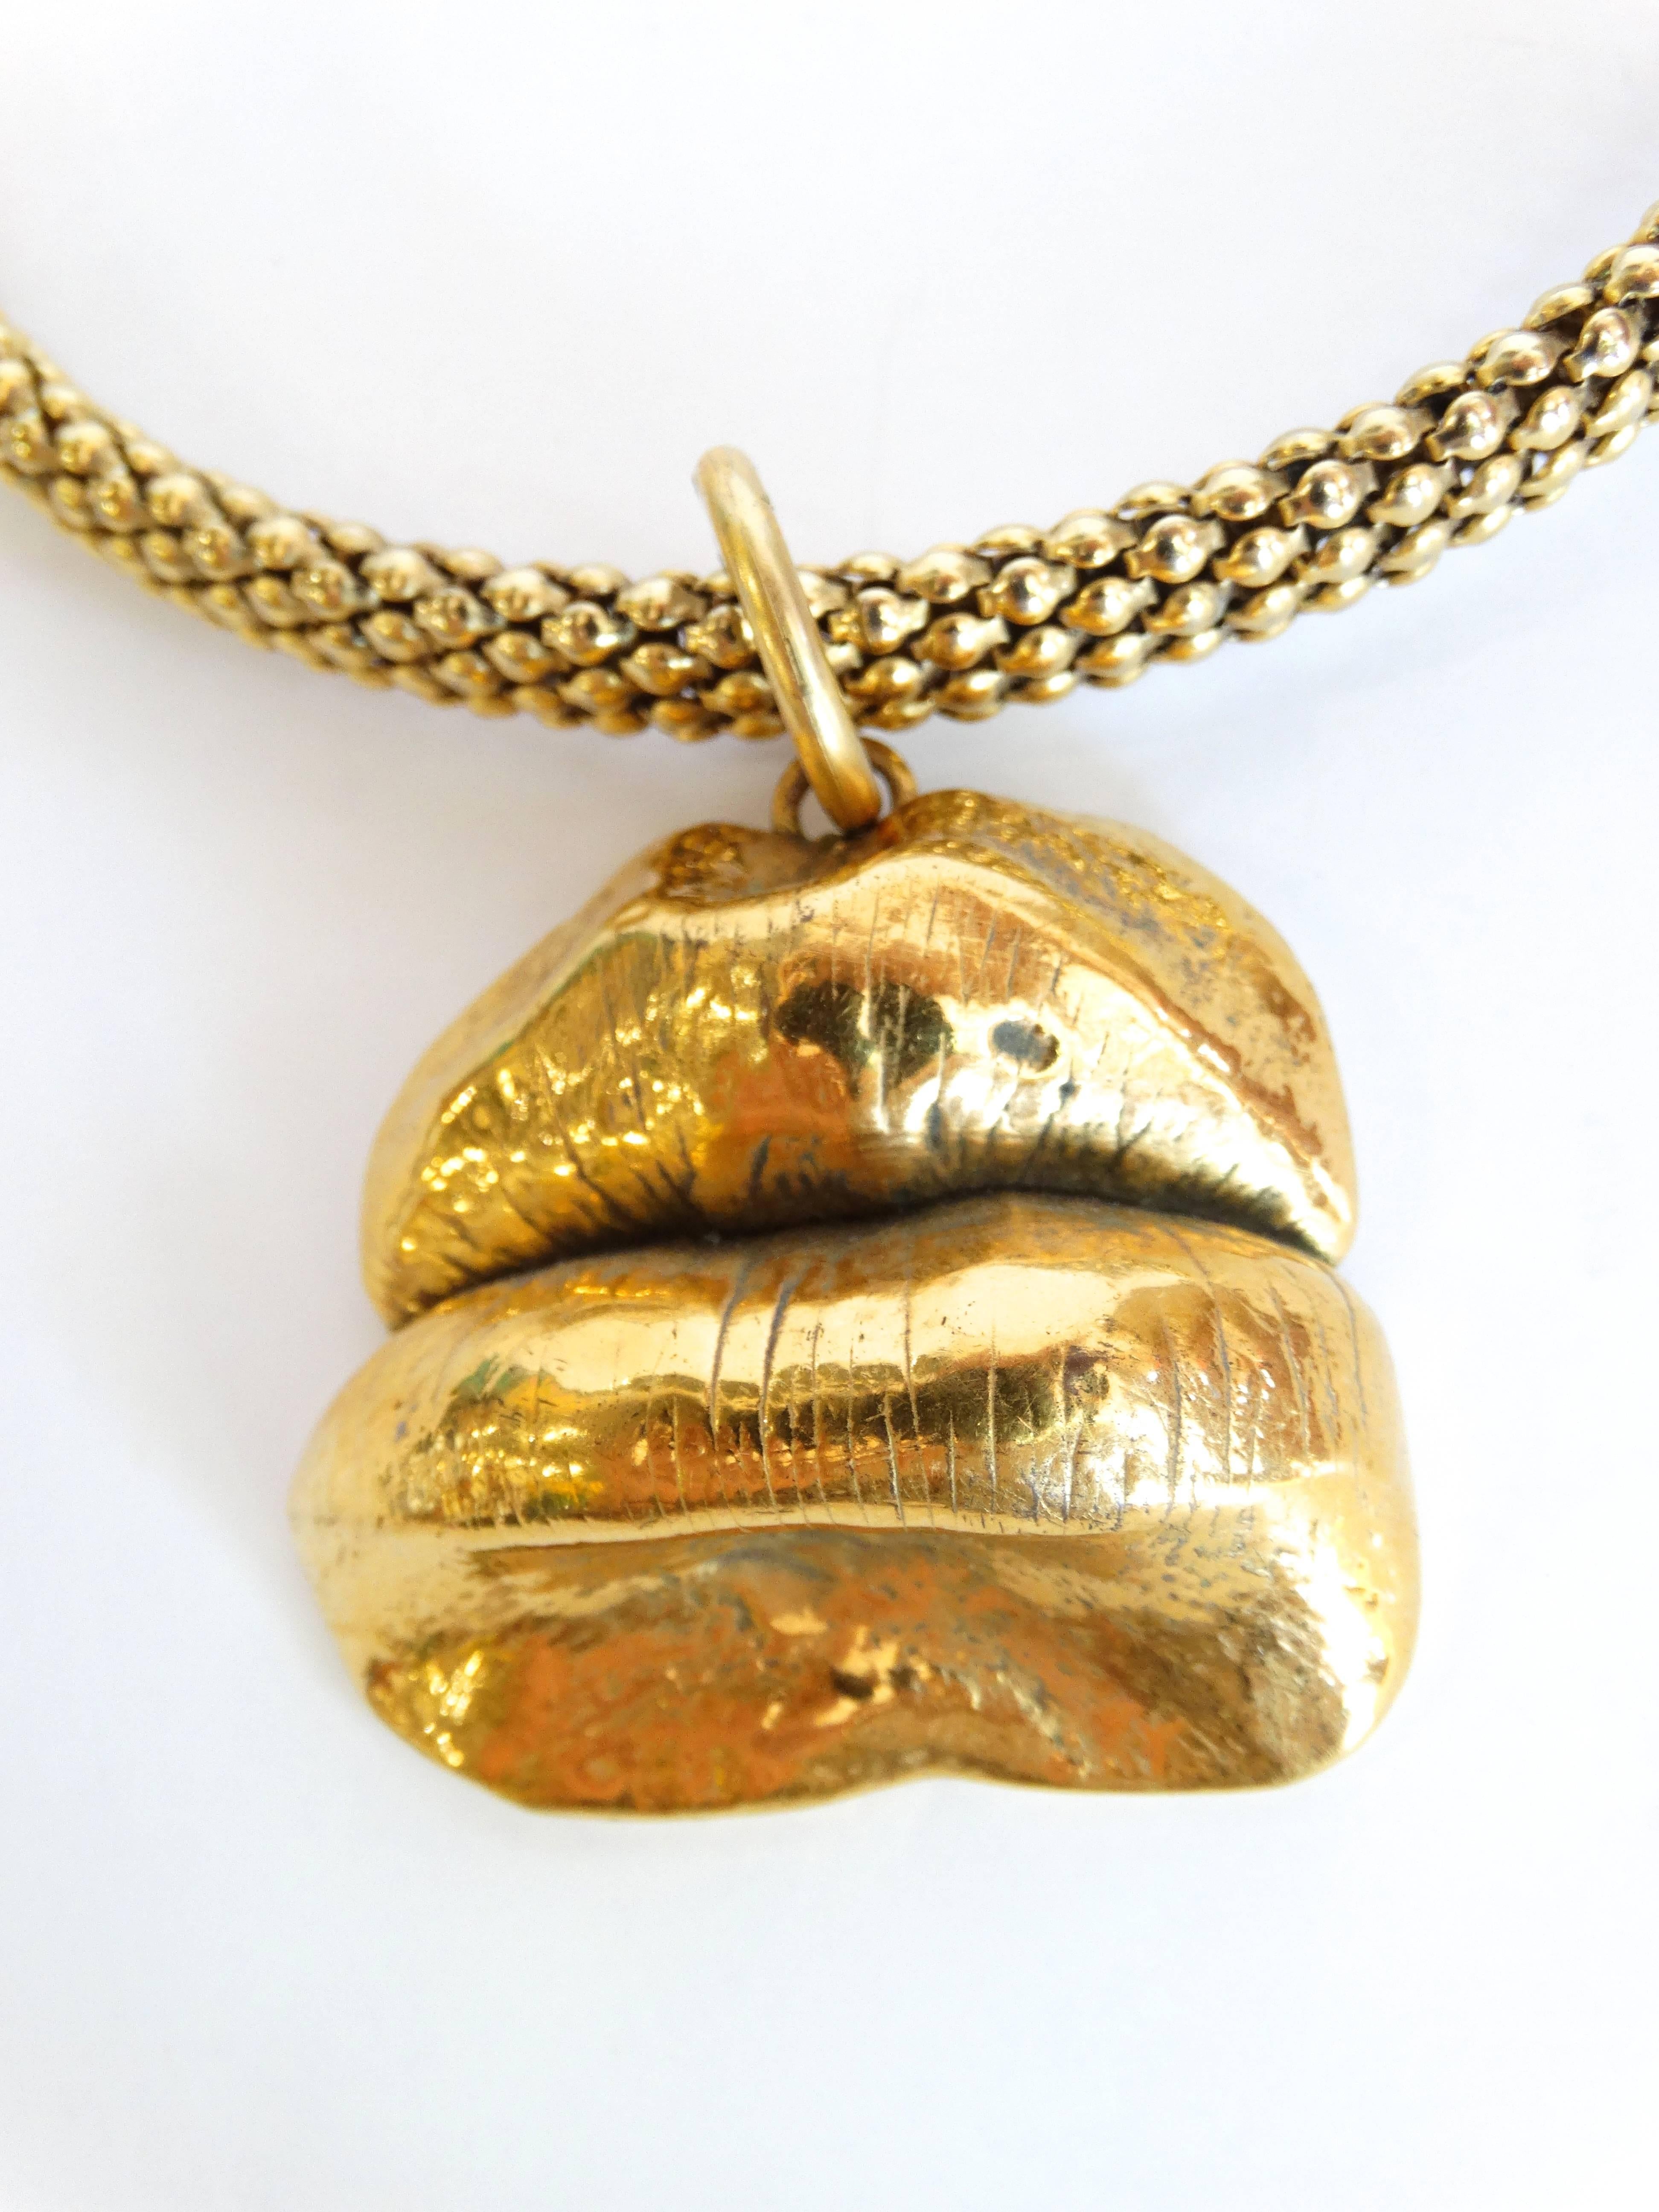 This piece is one of a kind- this is an actual pair of lips cast in gold metal. Attached to a gold collar necklace lips are Signed on the back with the Initials EA. Unknown designer piece 